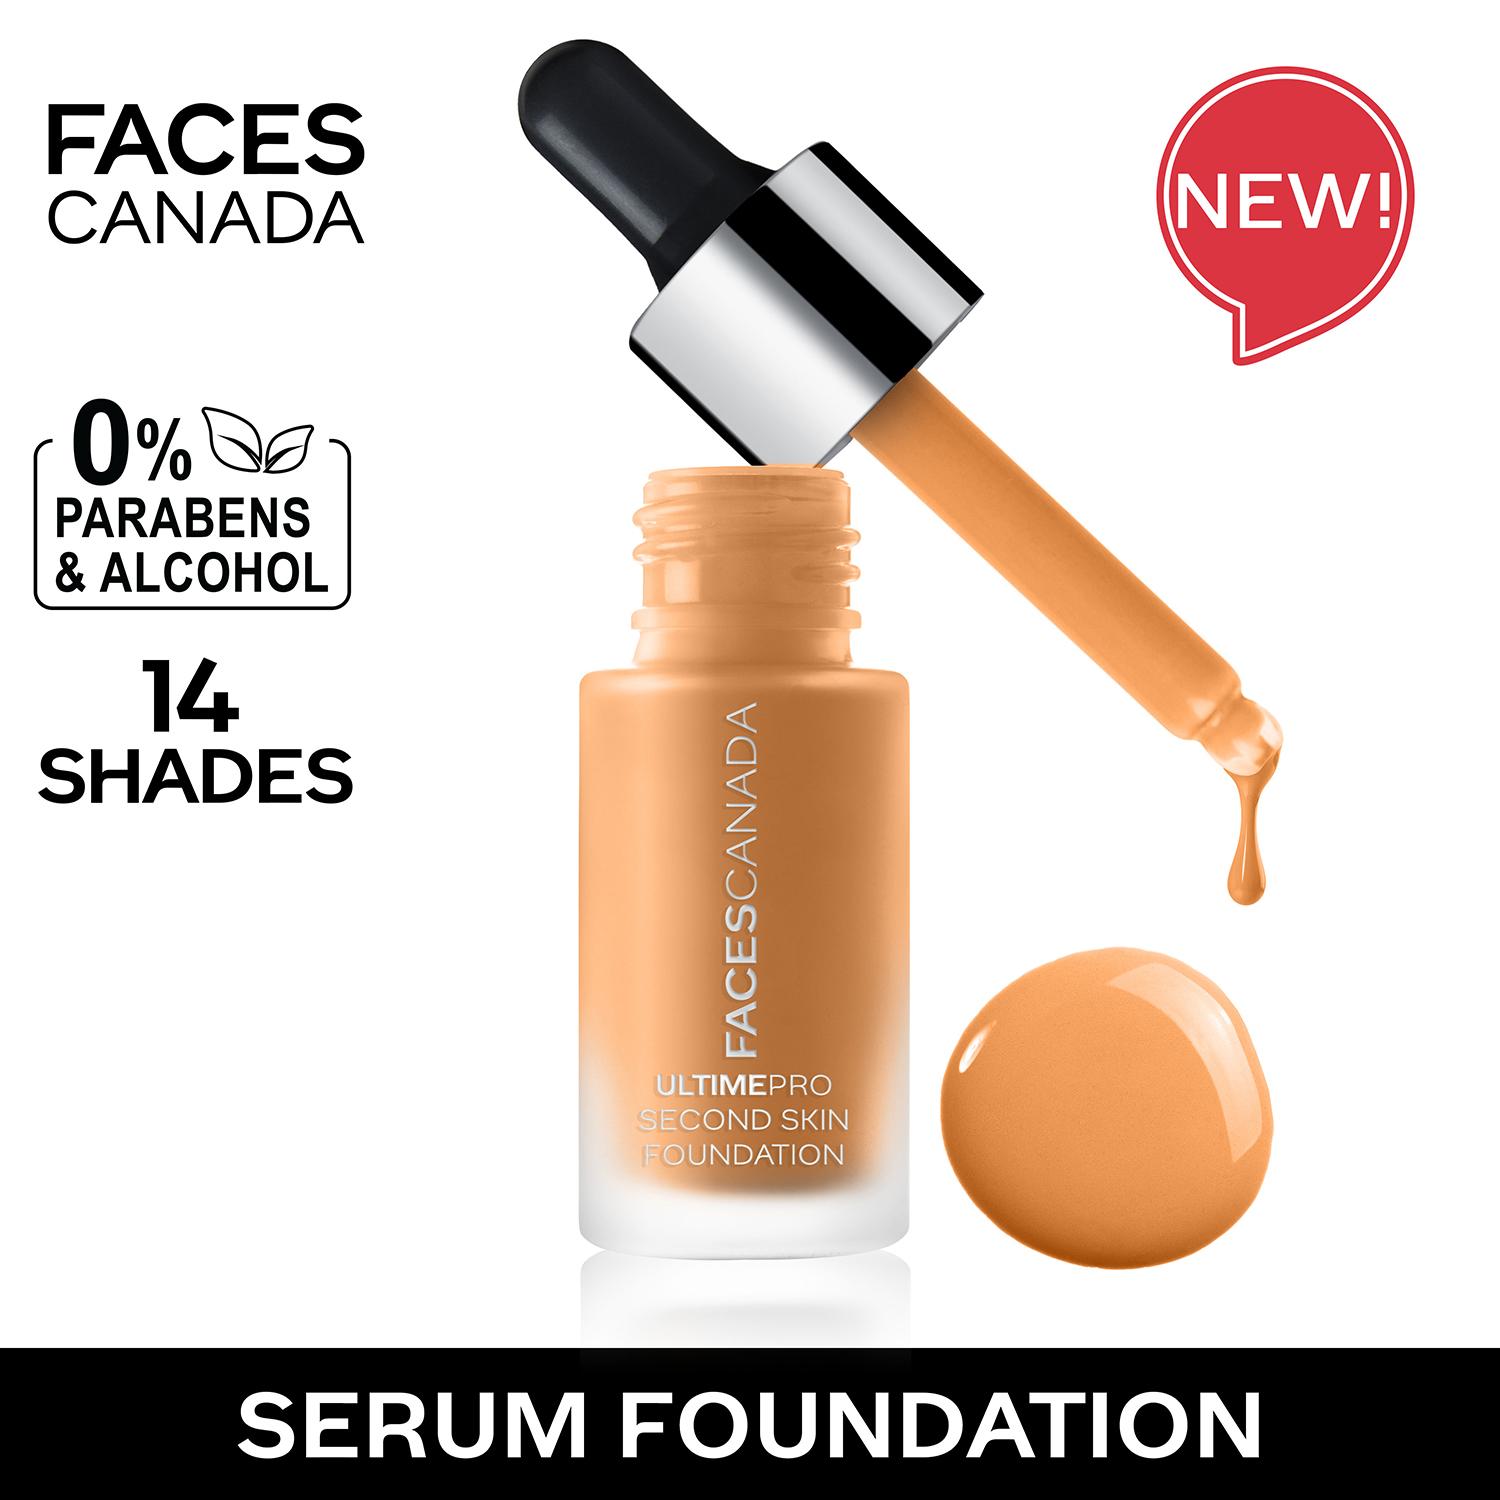 Faces Canada | Faces Canada Ultime Pro Second Skin Foundation - Sand 04, Matte Finish, SPF 15 (15 ml)